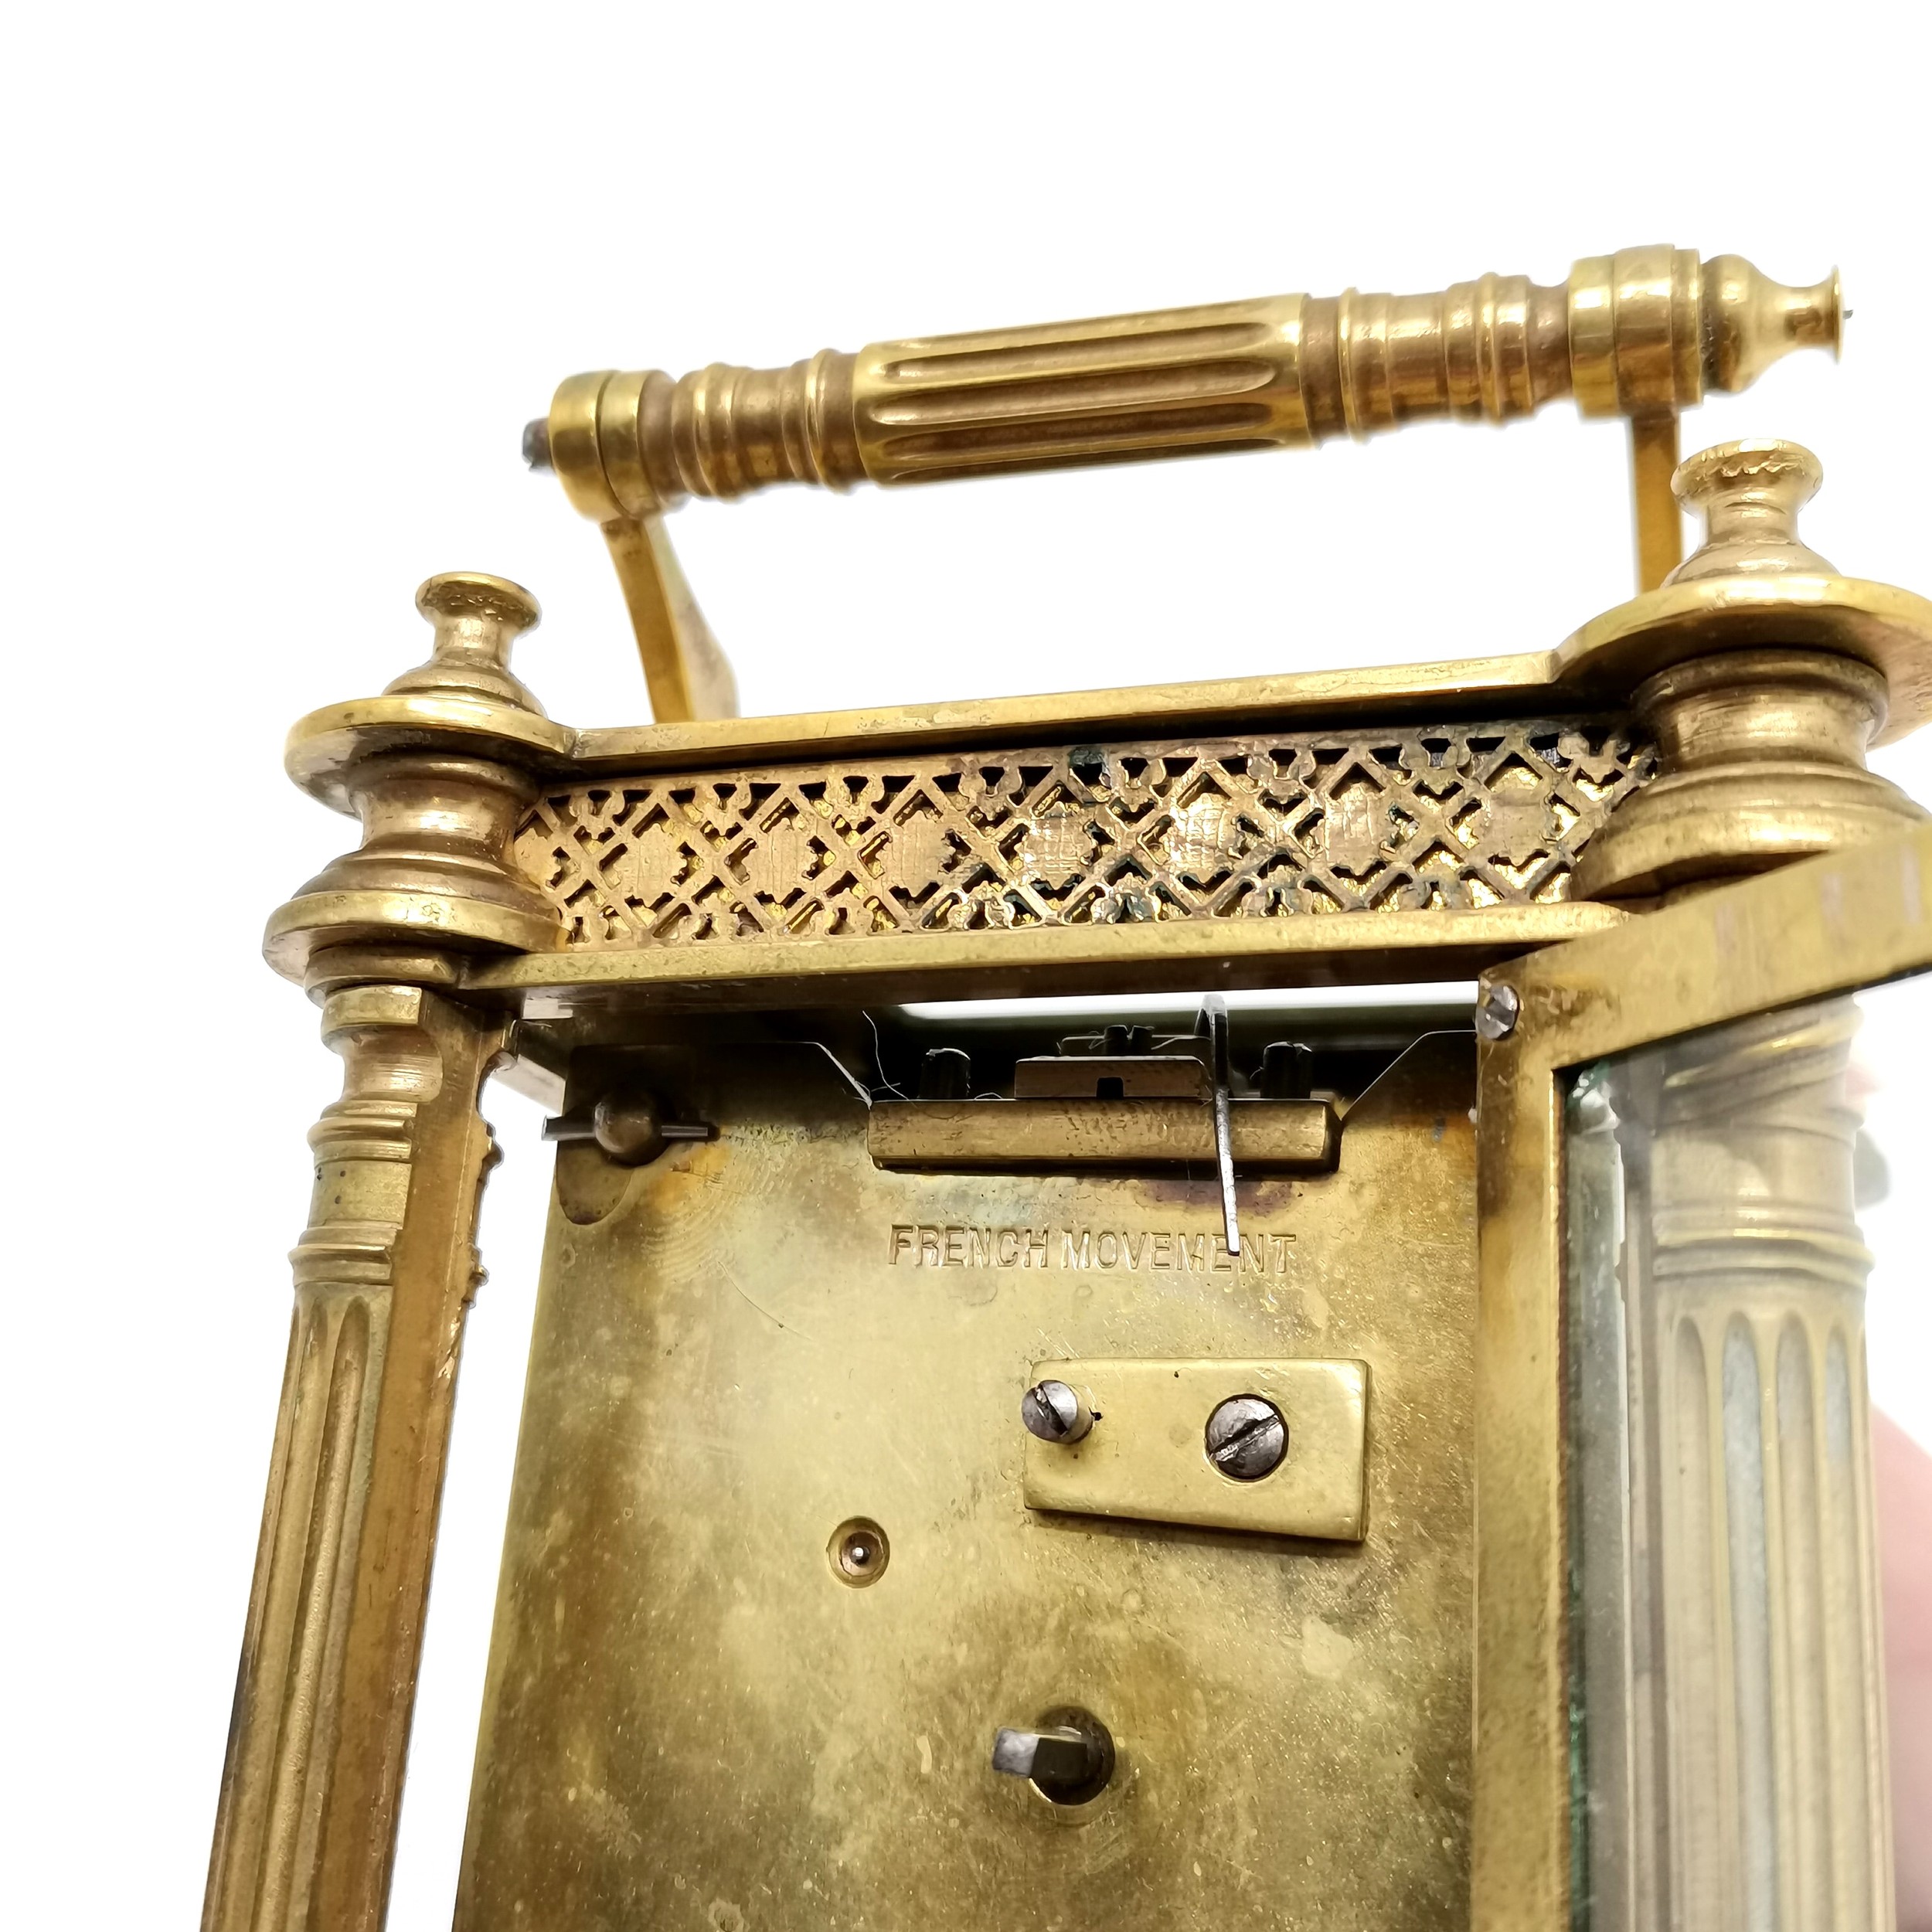 Antique brass cased carriage clock with fluted column detail - 13cm high & running at time of - Image 4 of 5